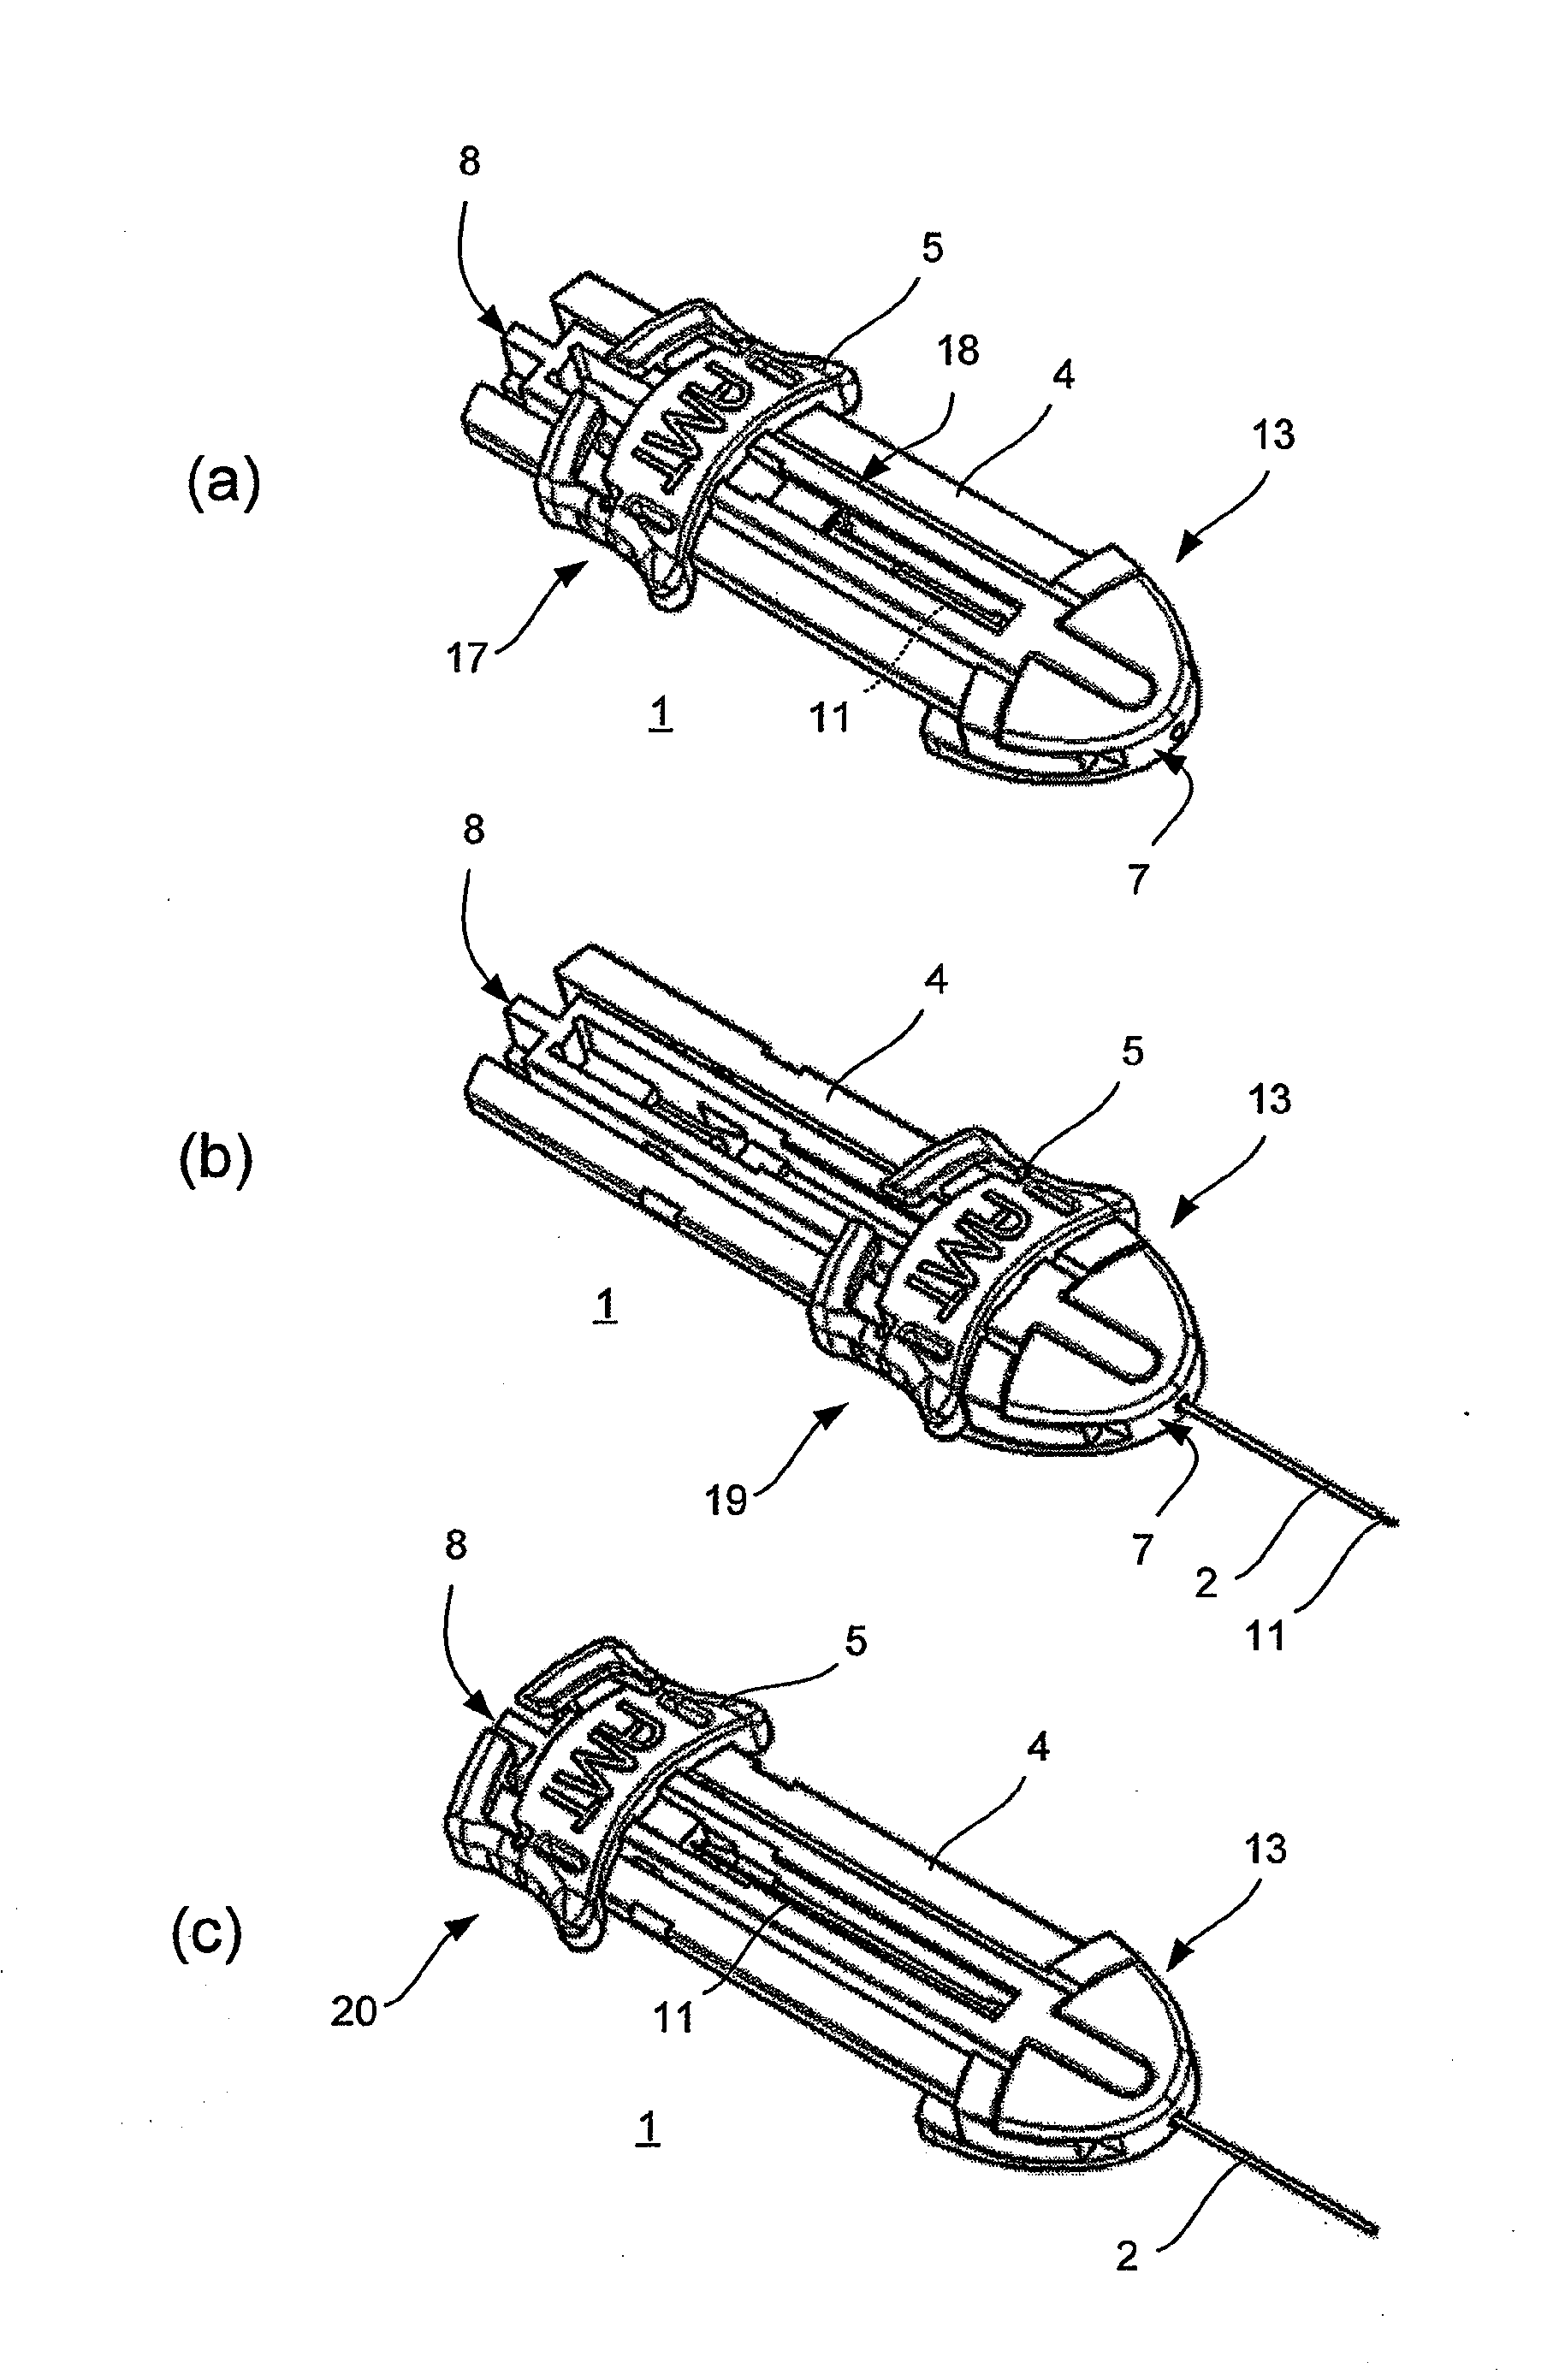 Cannula insertion device